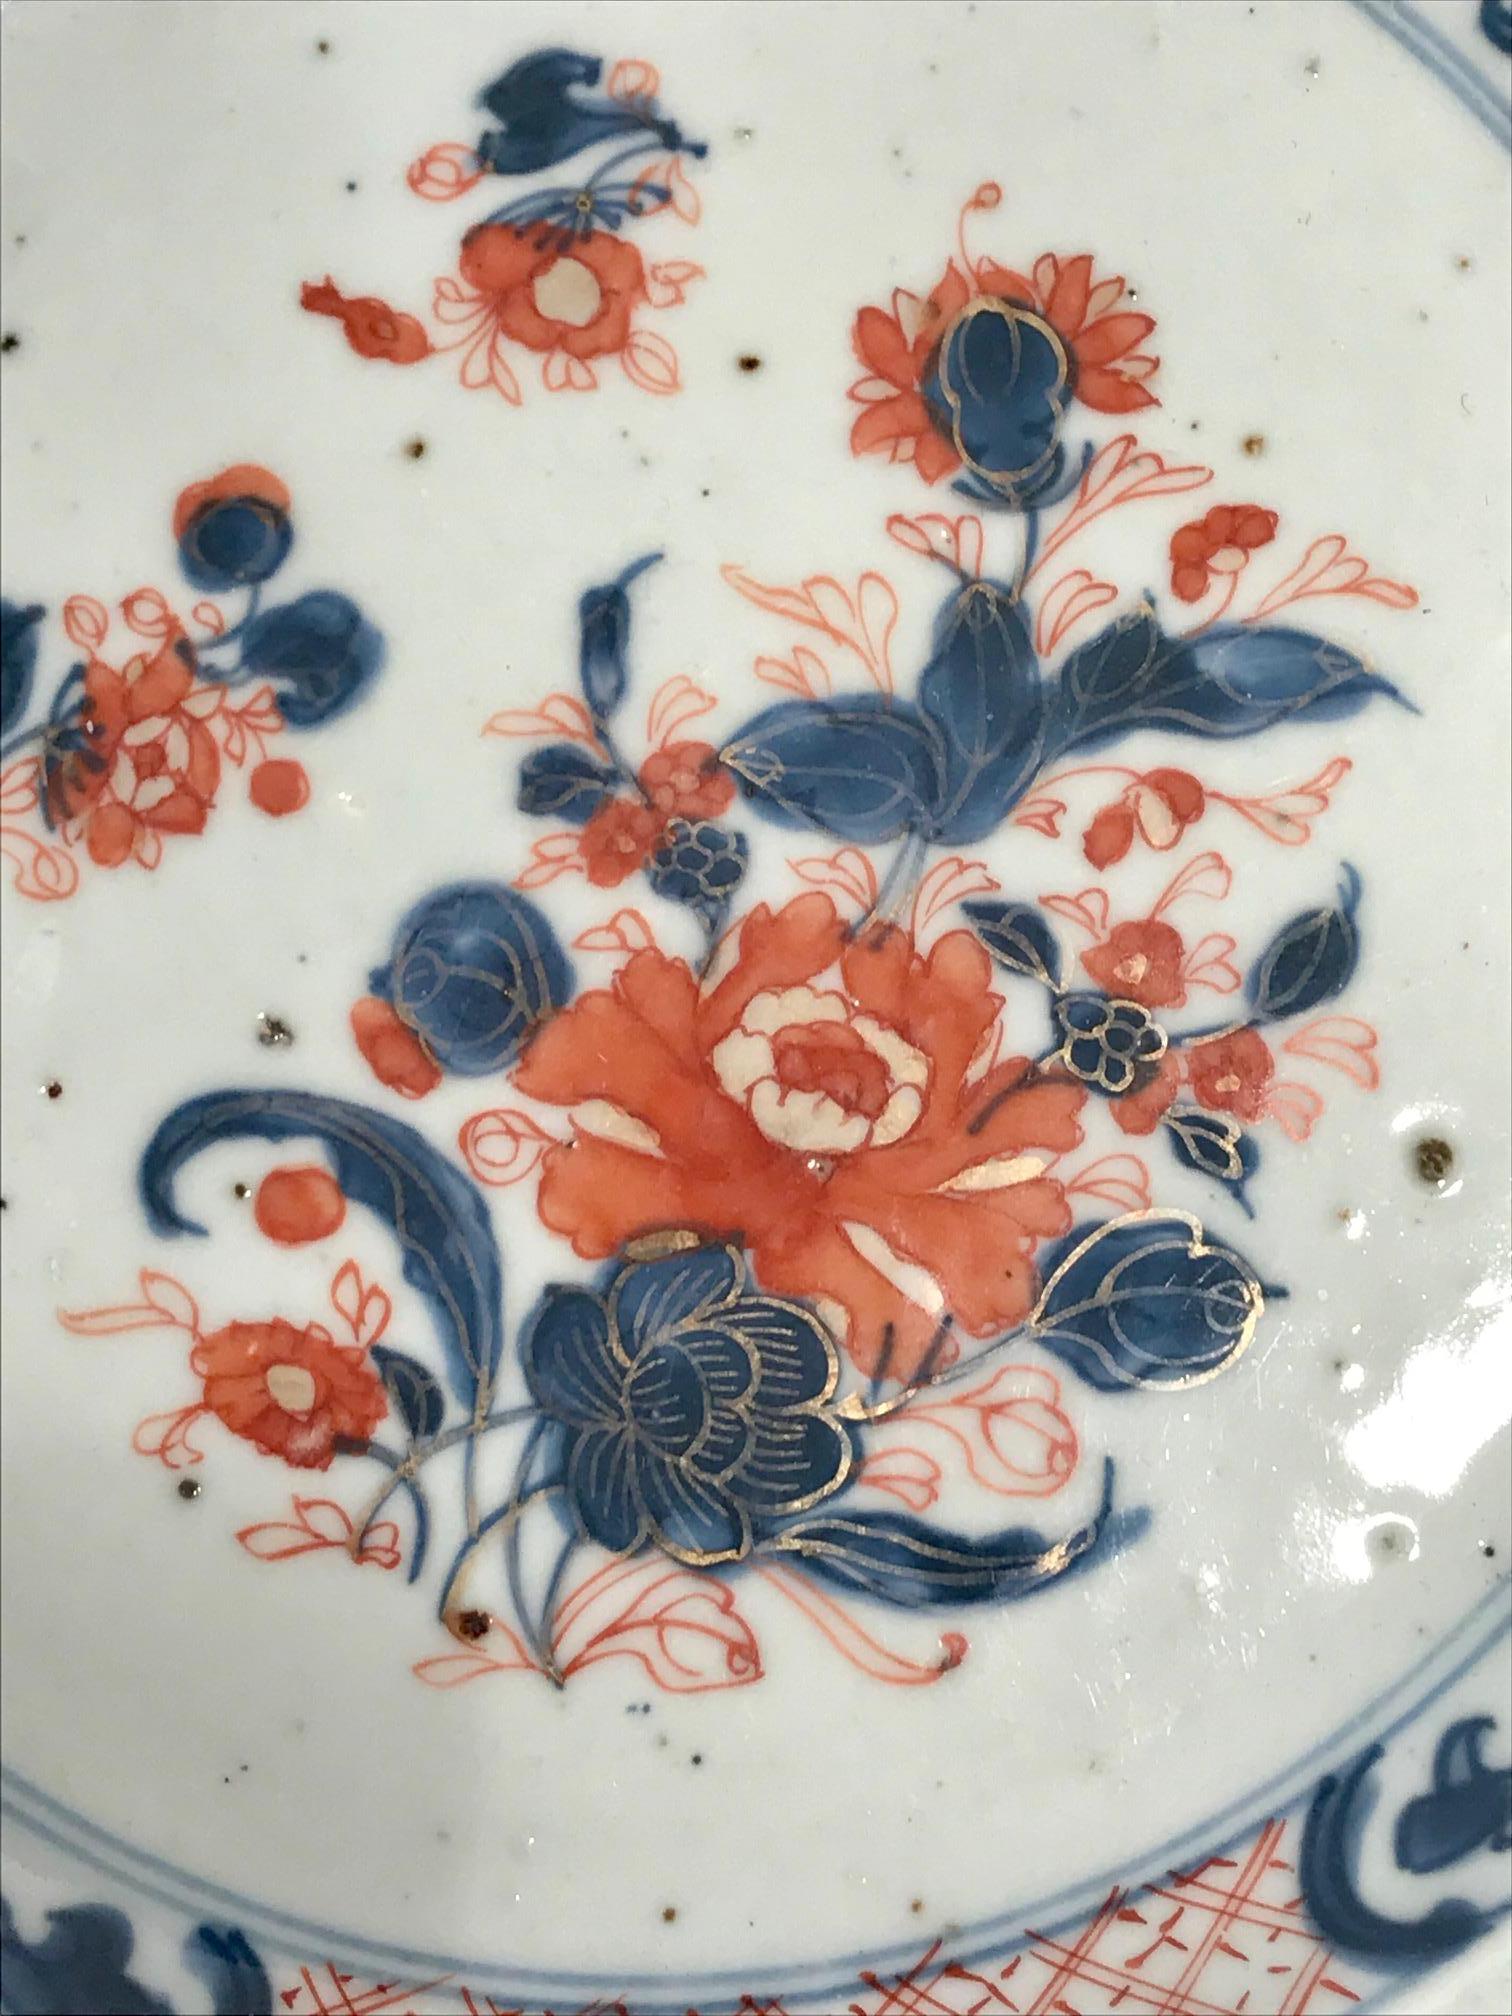 Antique Chinese Imari export porcelain plate from The Elinor Gordon Collection. Decorated by hand in an underglaze blue and then overpainted in iron red and gold and so it has become known as Chinese Imari. The center of the plate has a floral